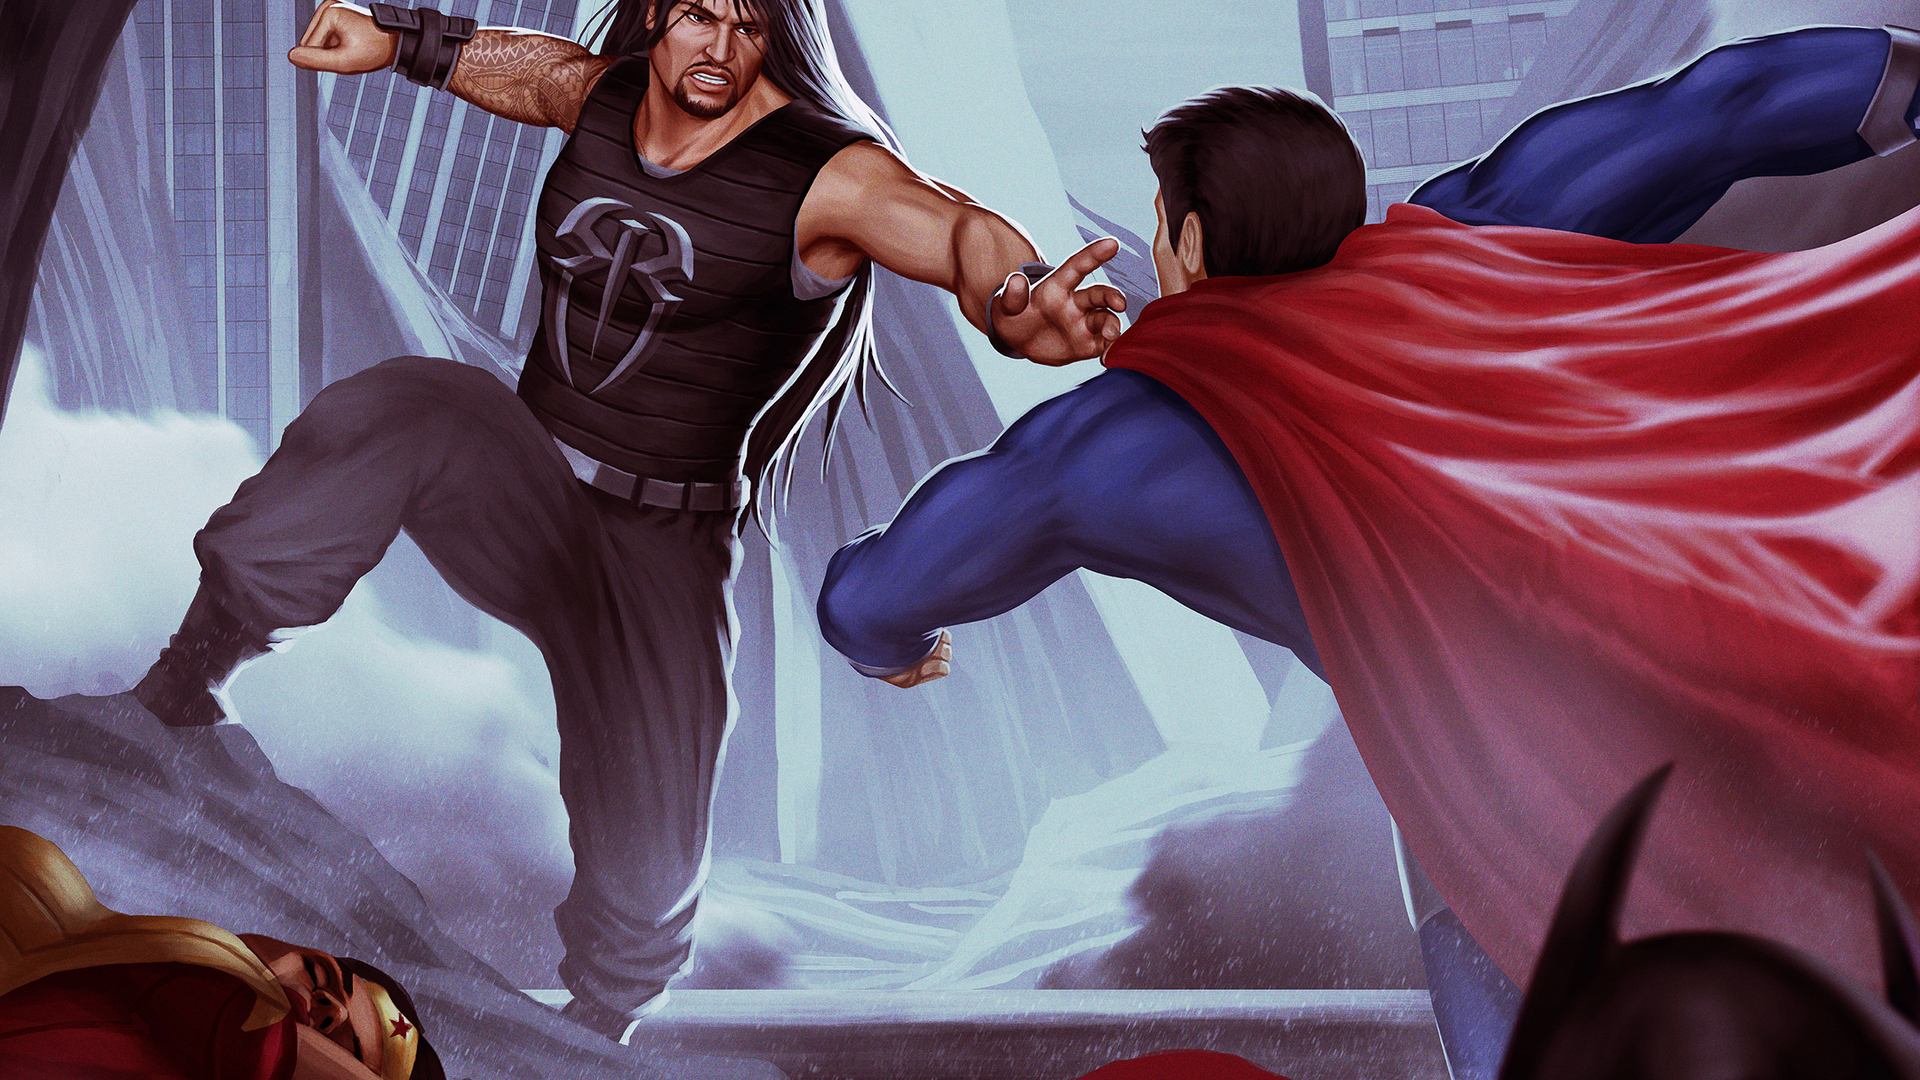 1920x1080 Roman Reigns Vs Superman Art Laptop Full HD 1080P HD 4k Wallpapers,  Images, Backgrounds, Photos and Pictures